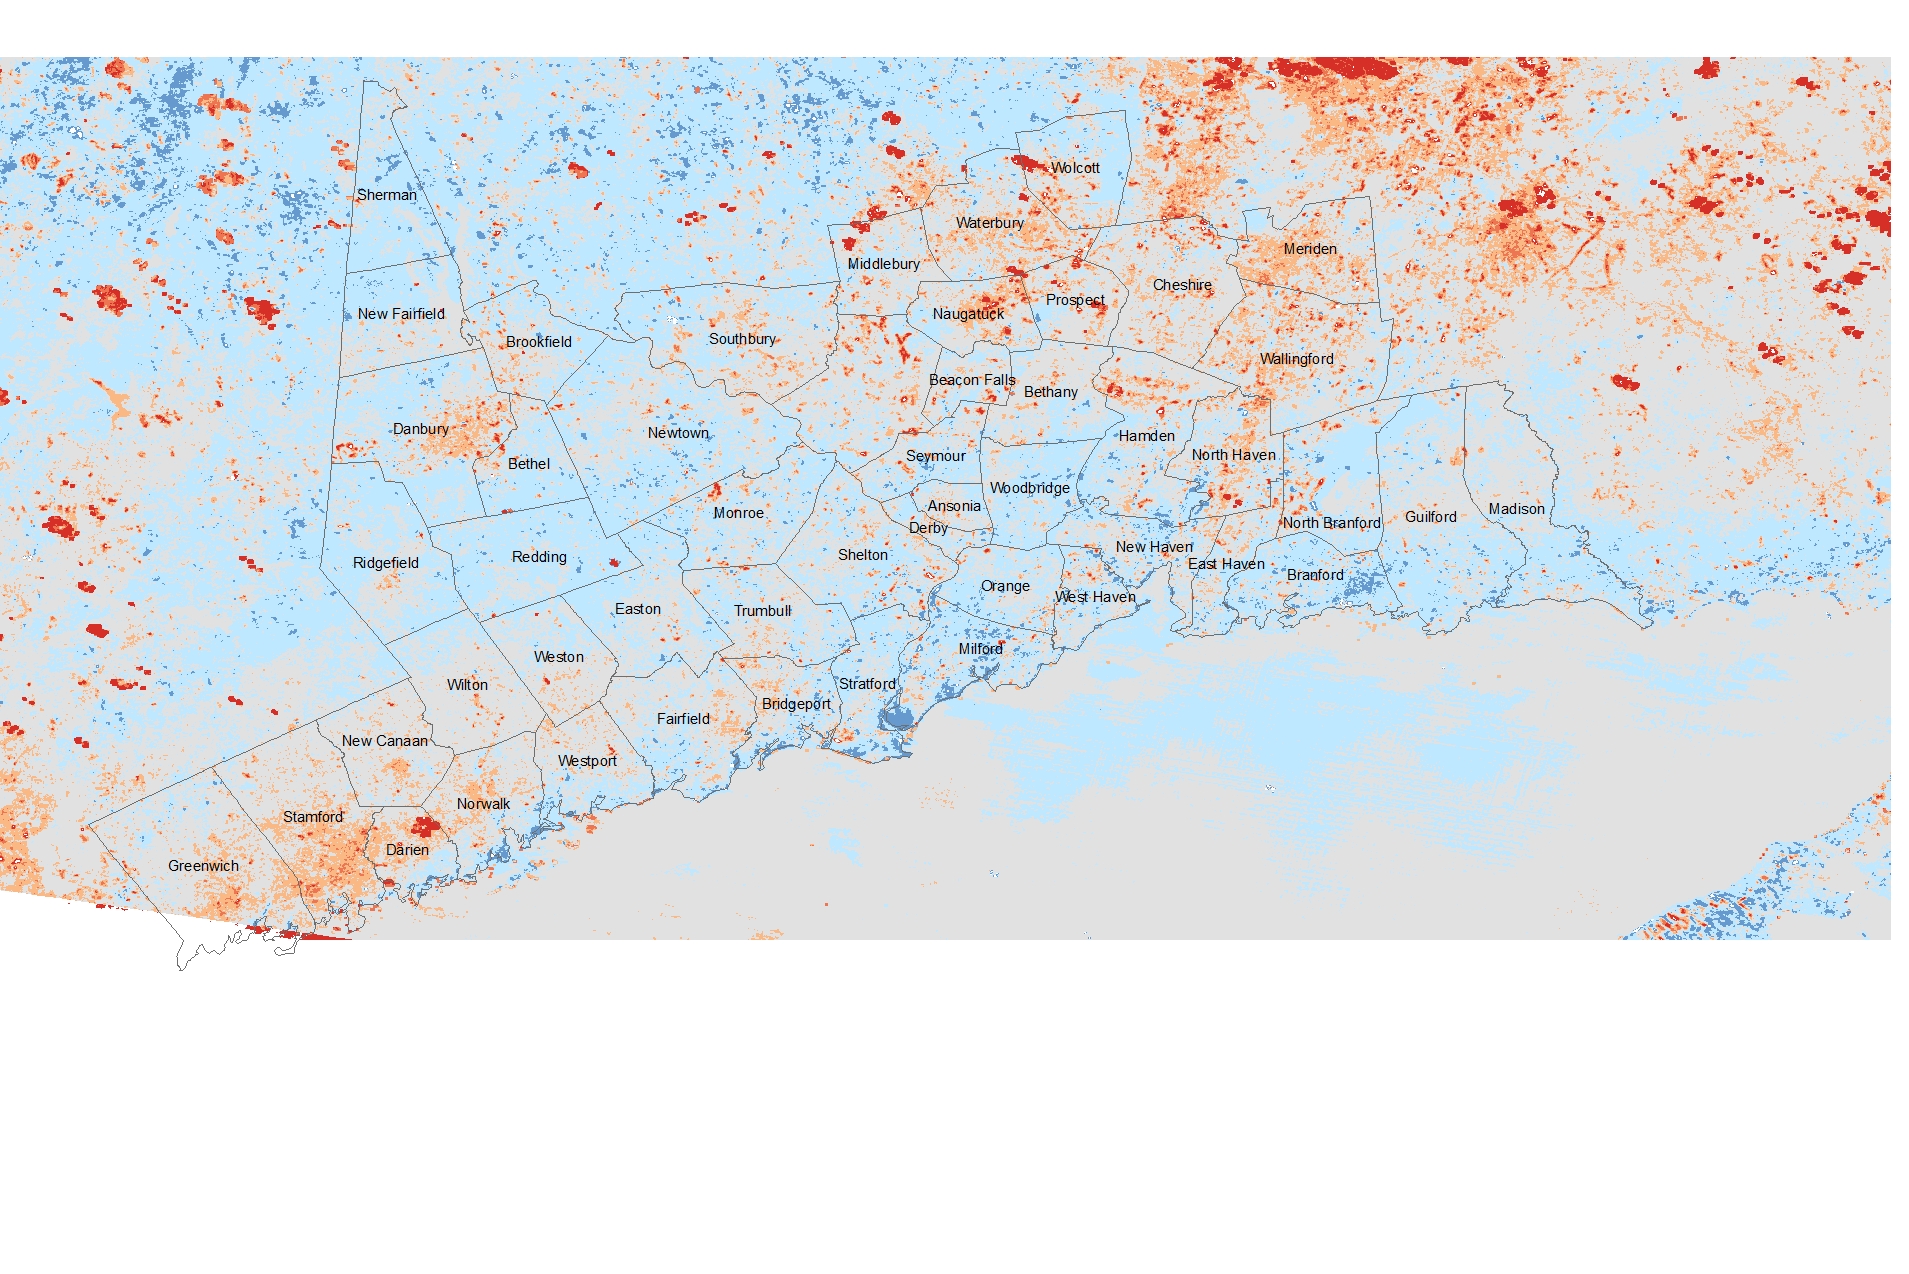 Land Surface Temperature Remote Sensing - Fairfield and New Haven Counties, Connecticut (2020)